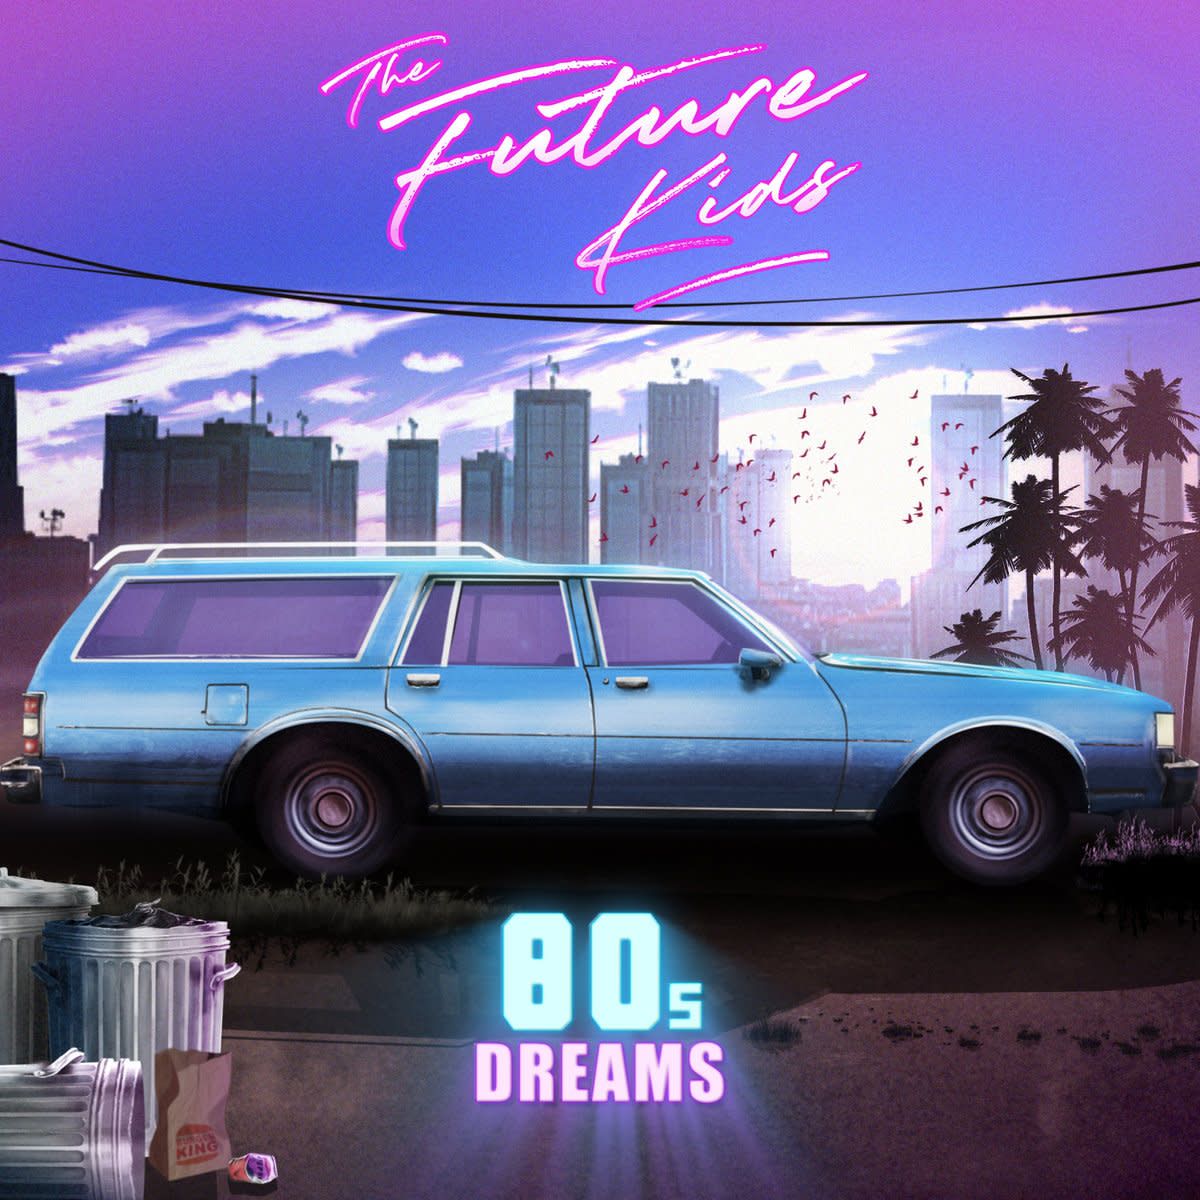 synth-album-review-80s-dreams-by-the-future-kids